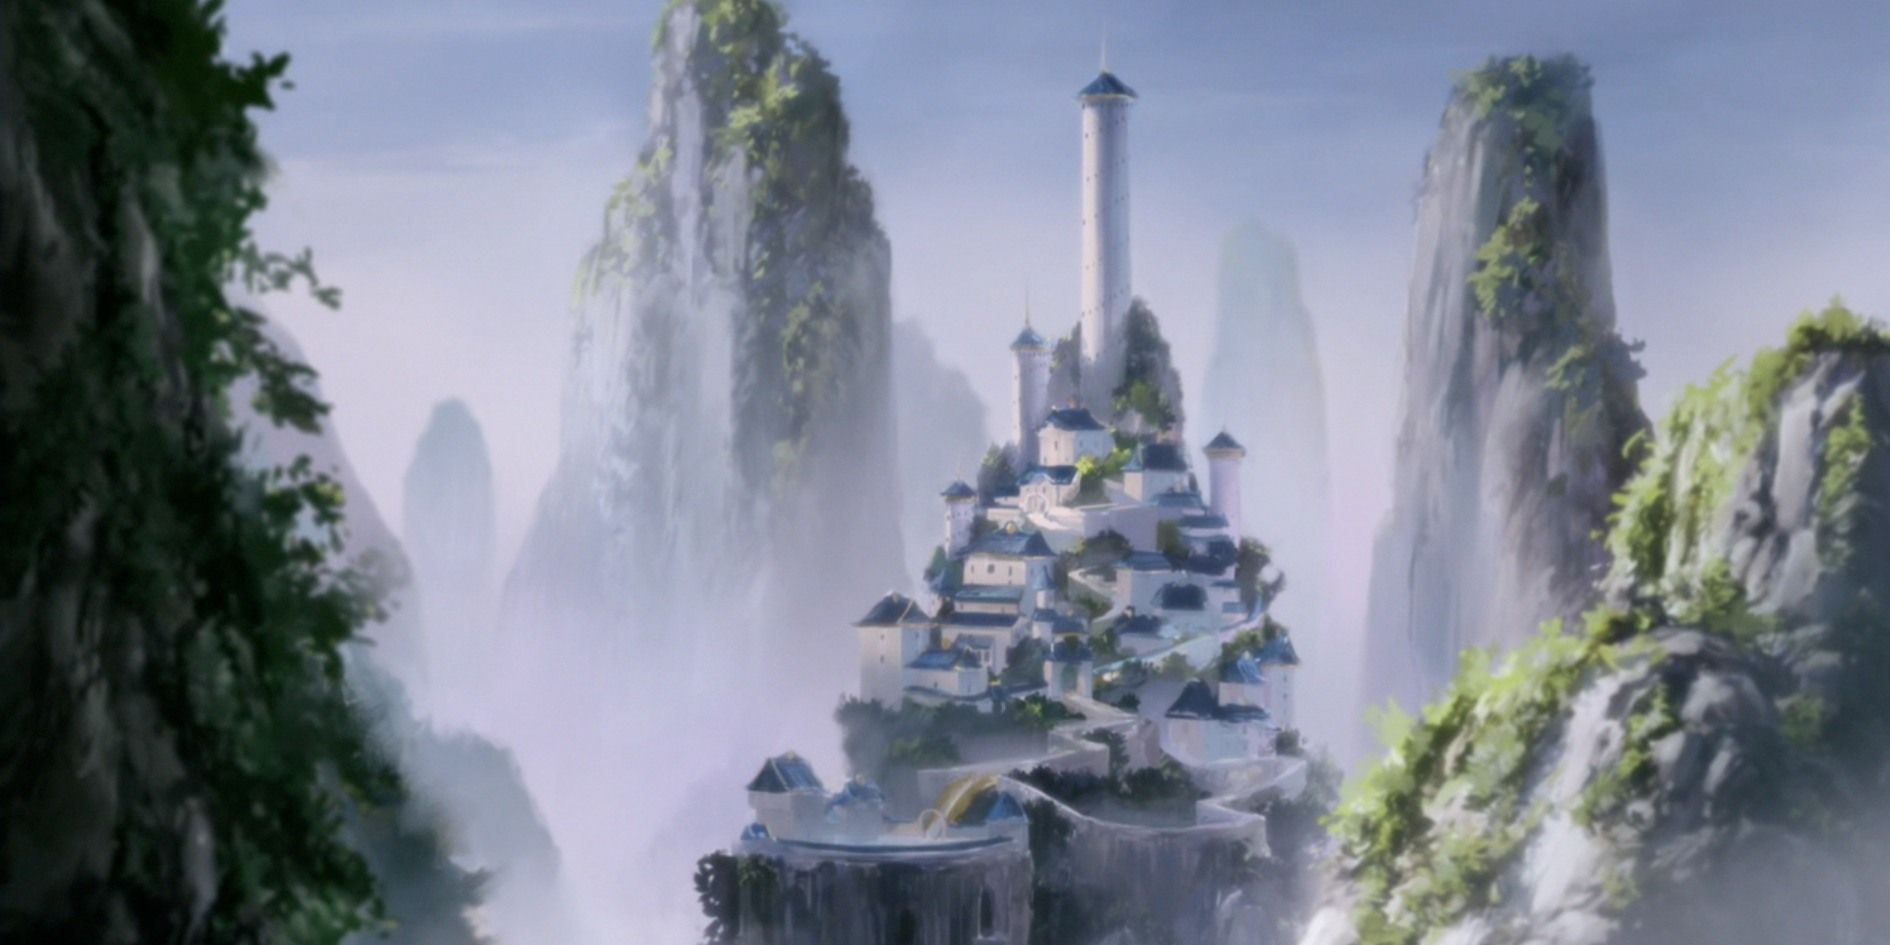 The Southern Air Temple in Avatar: The Last Airbender